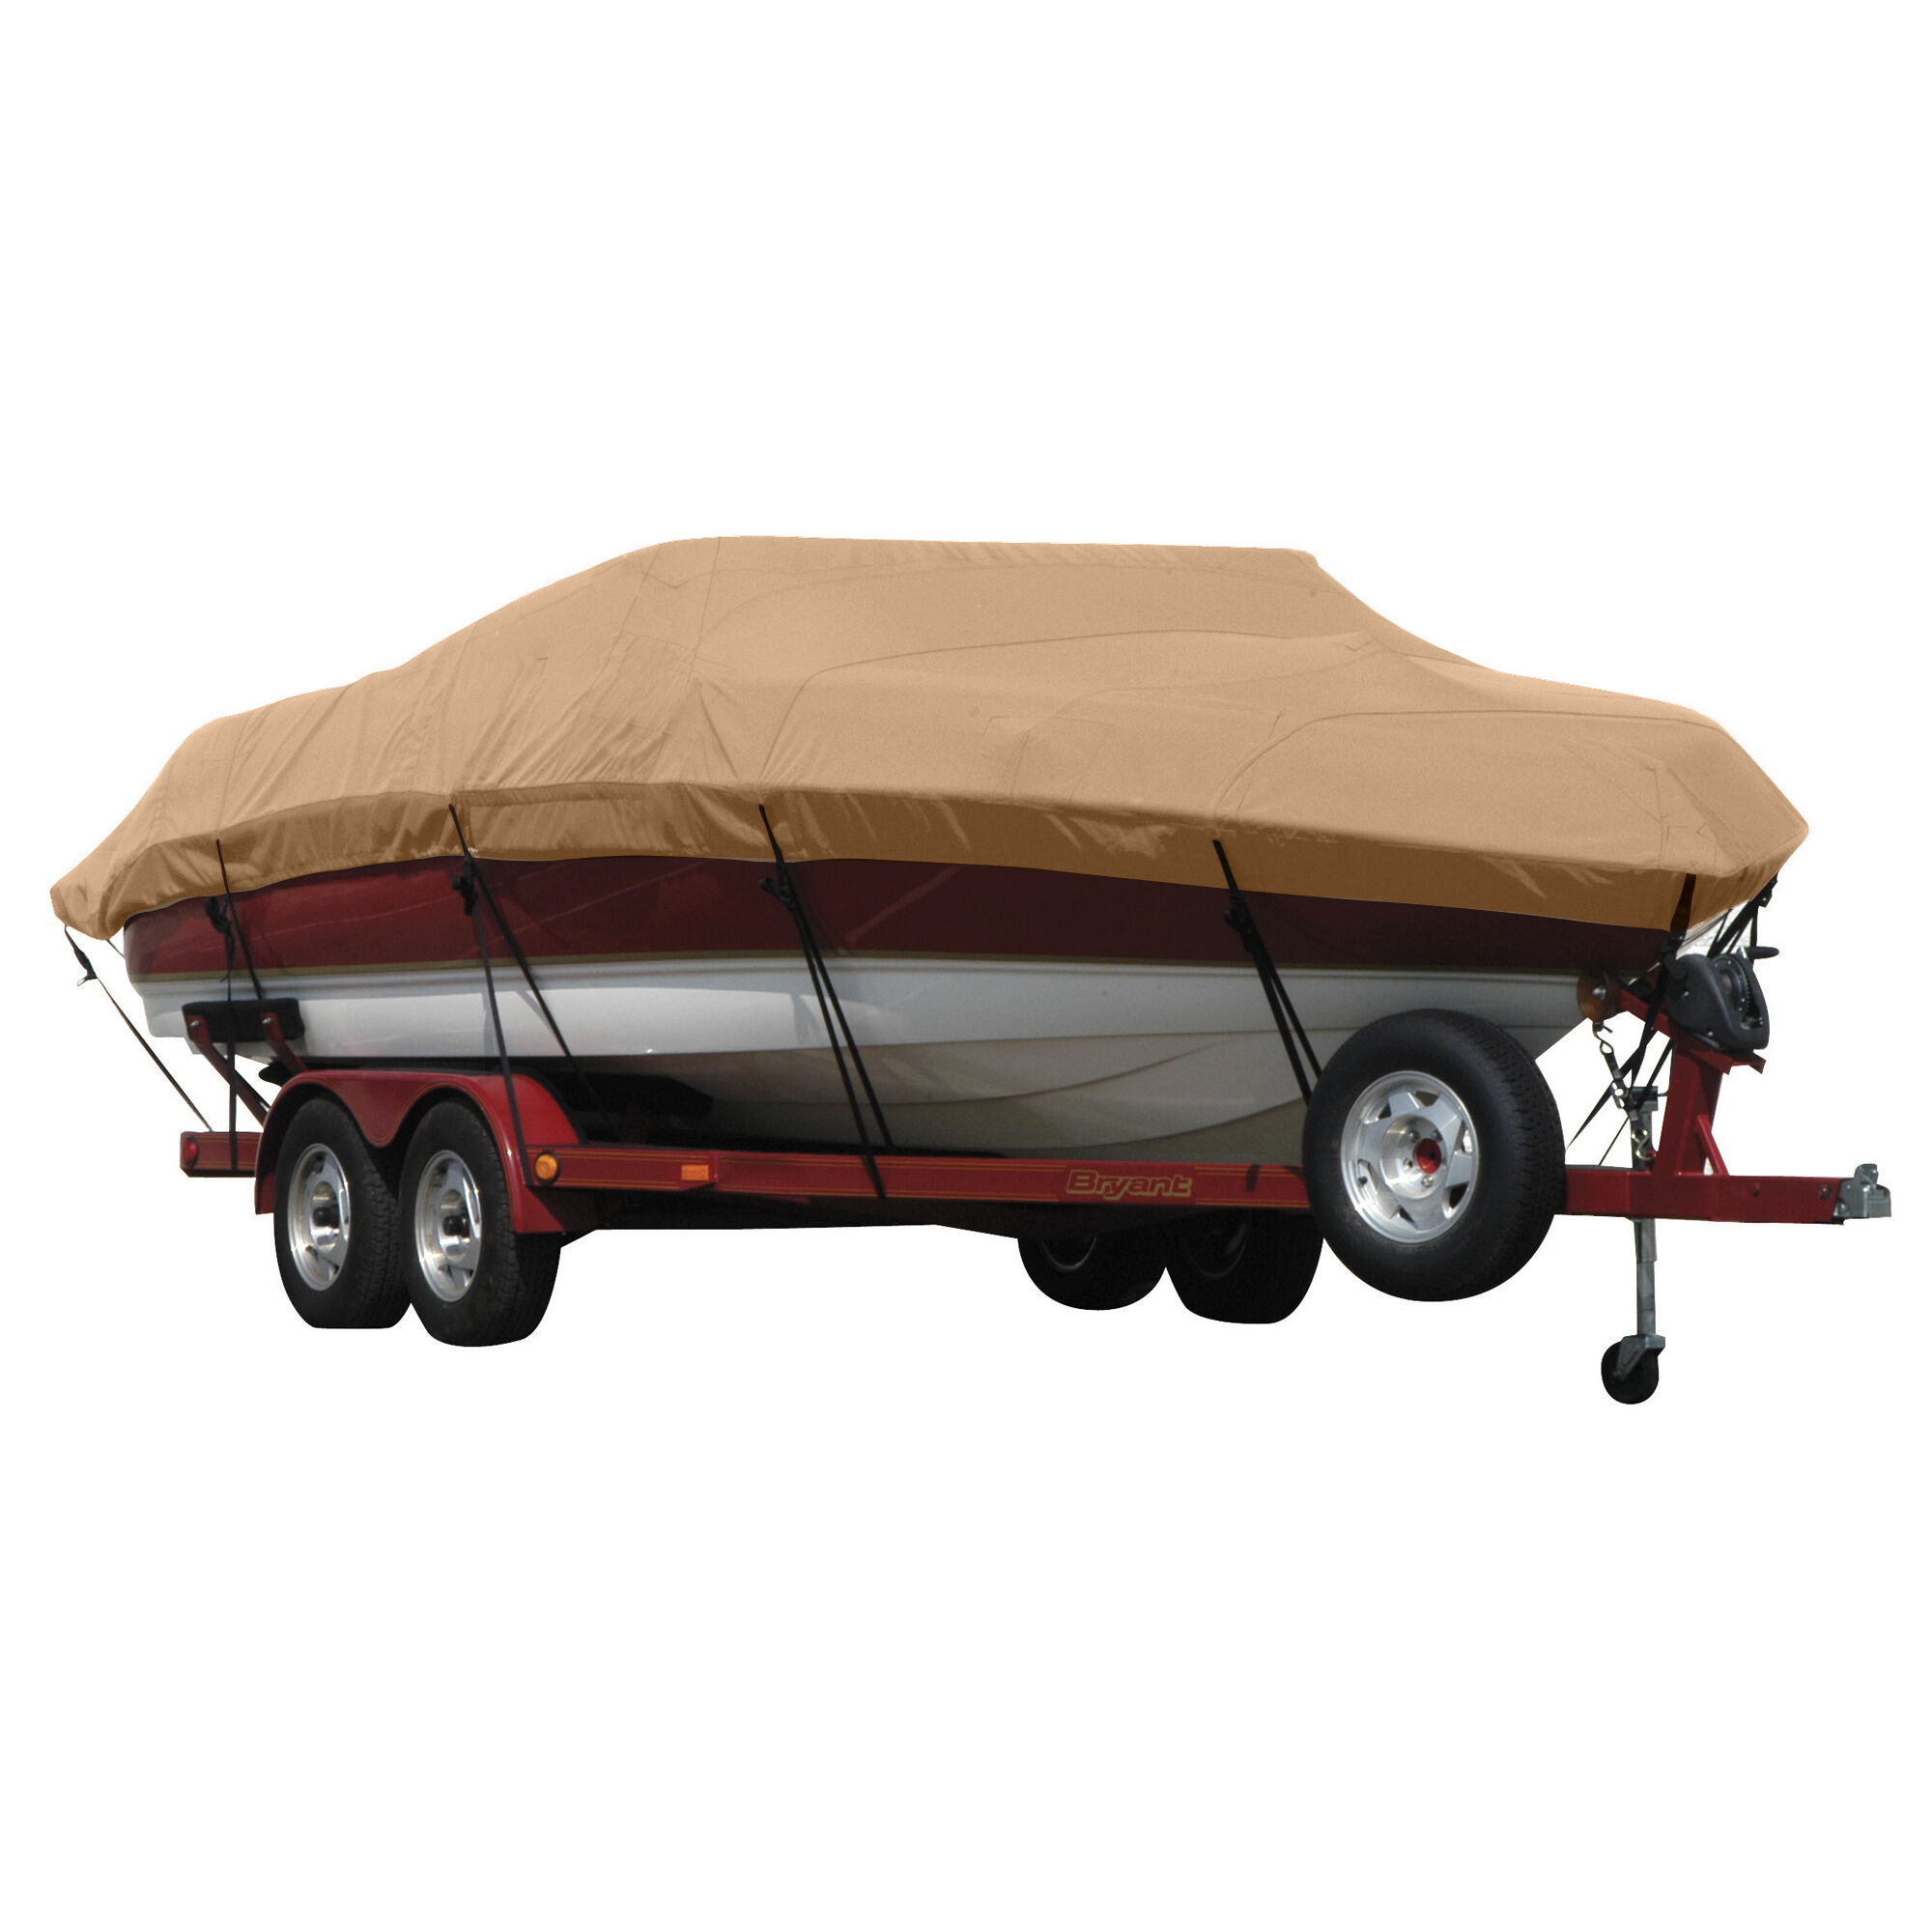 Covermate Exact Fit Sunbrella Boat Cover for Godfrey Pontoons & Deck Boats Sweetwater Challenger 180 Sweetwater Challenger 180 Br w/ Top Laid Down